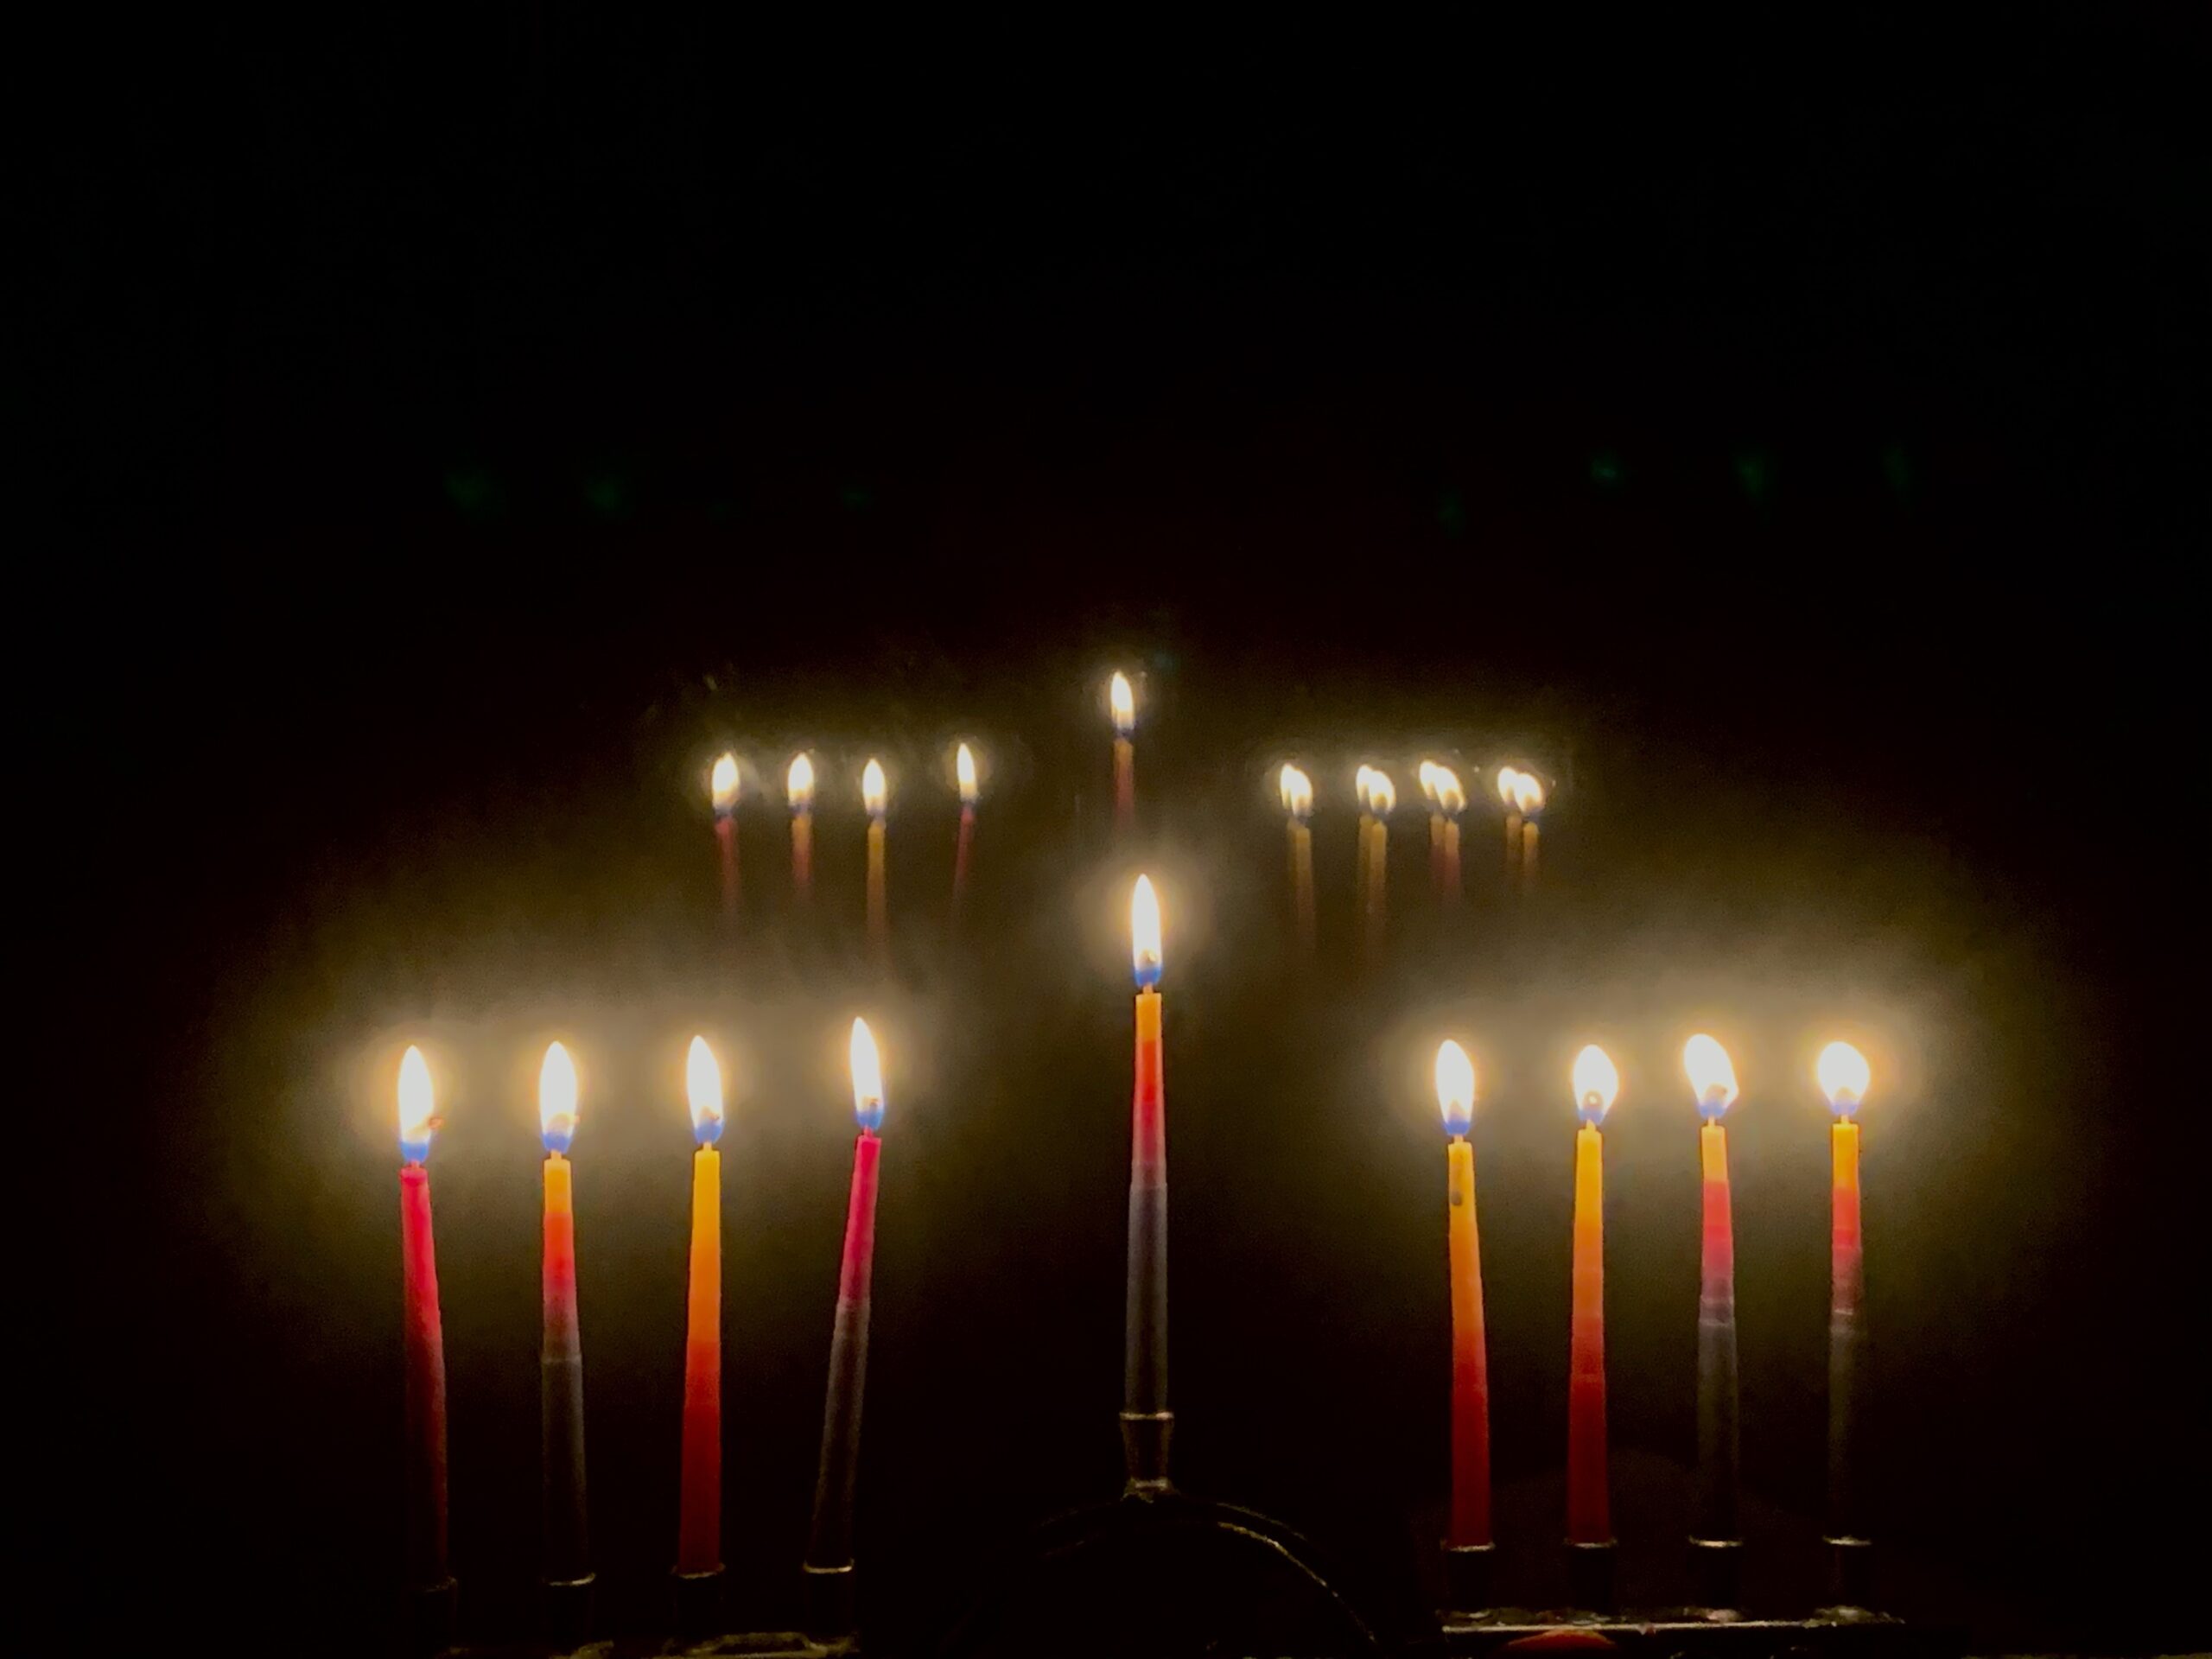 fully lit hanukkiyah in the dark with another hanukiyah in the background that appears to be a reflection of the first